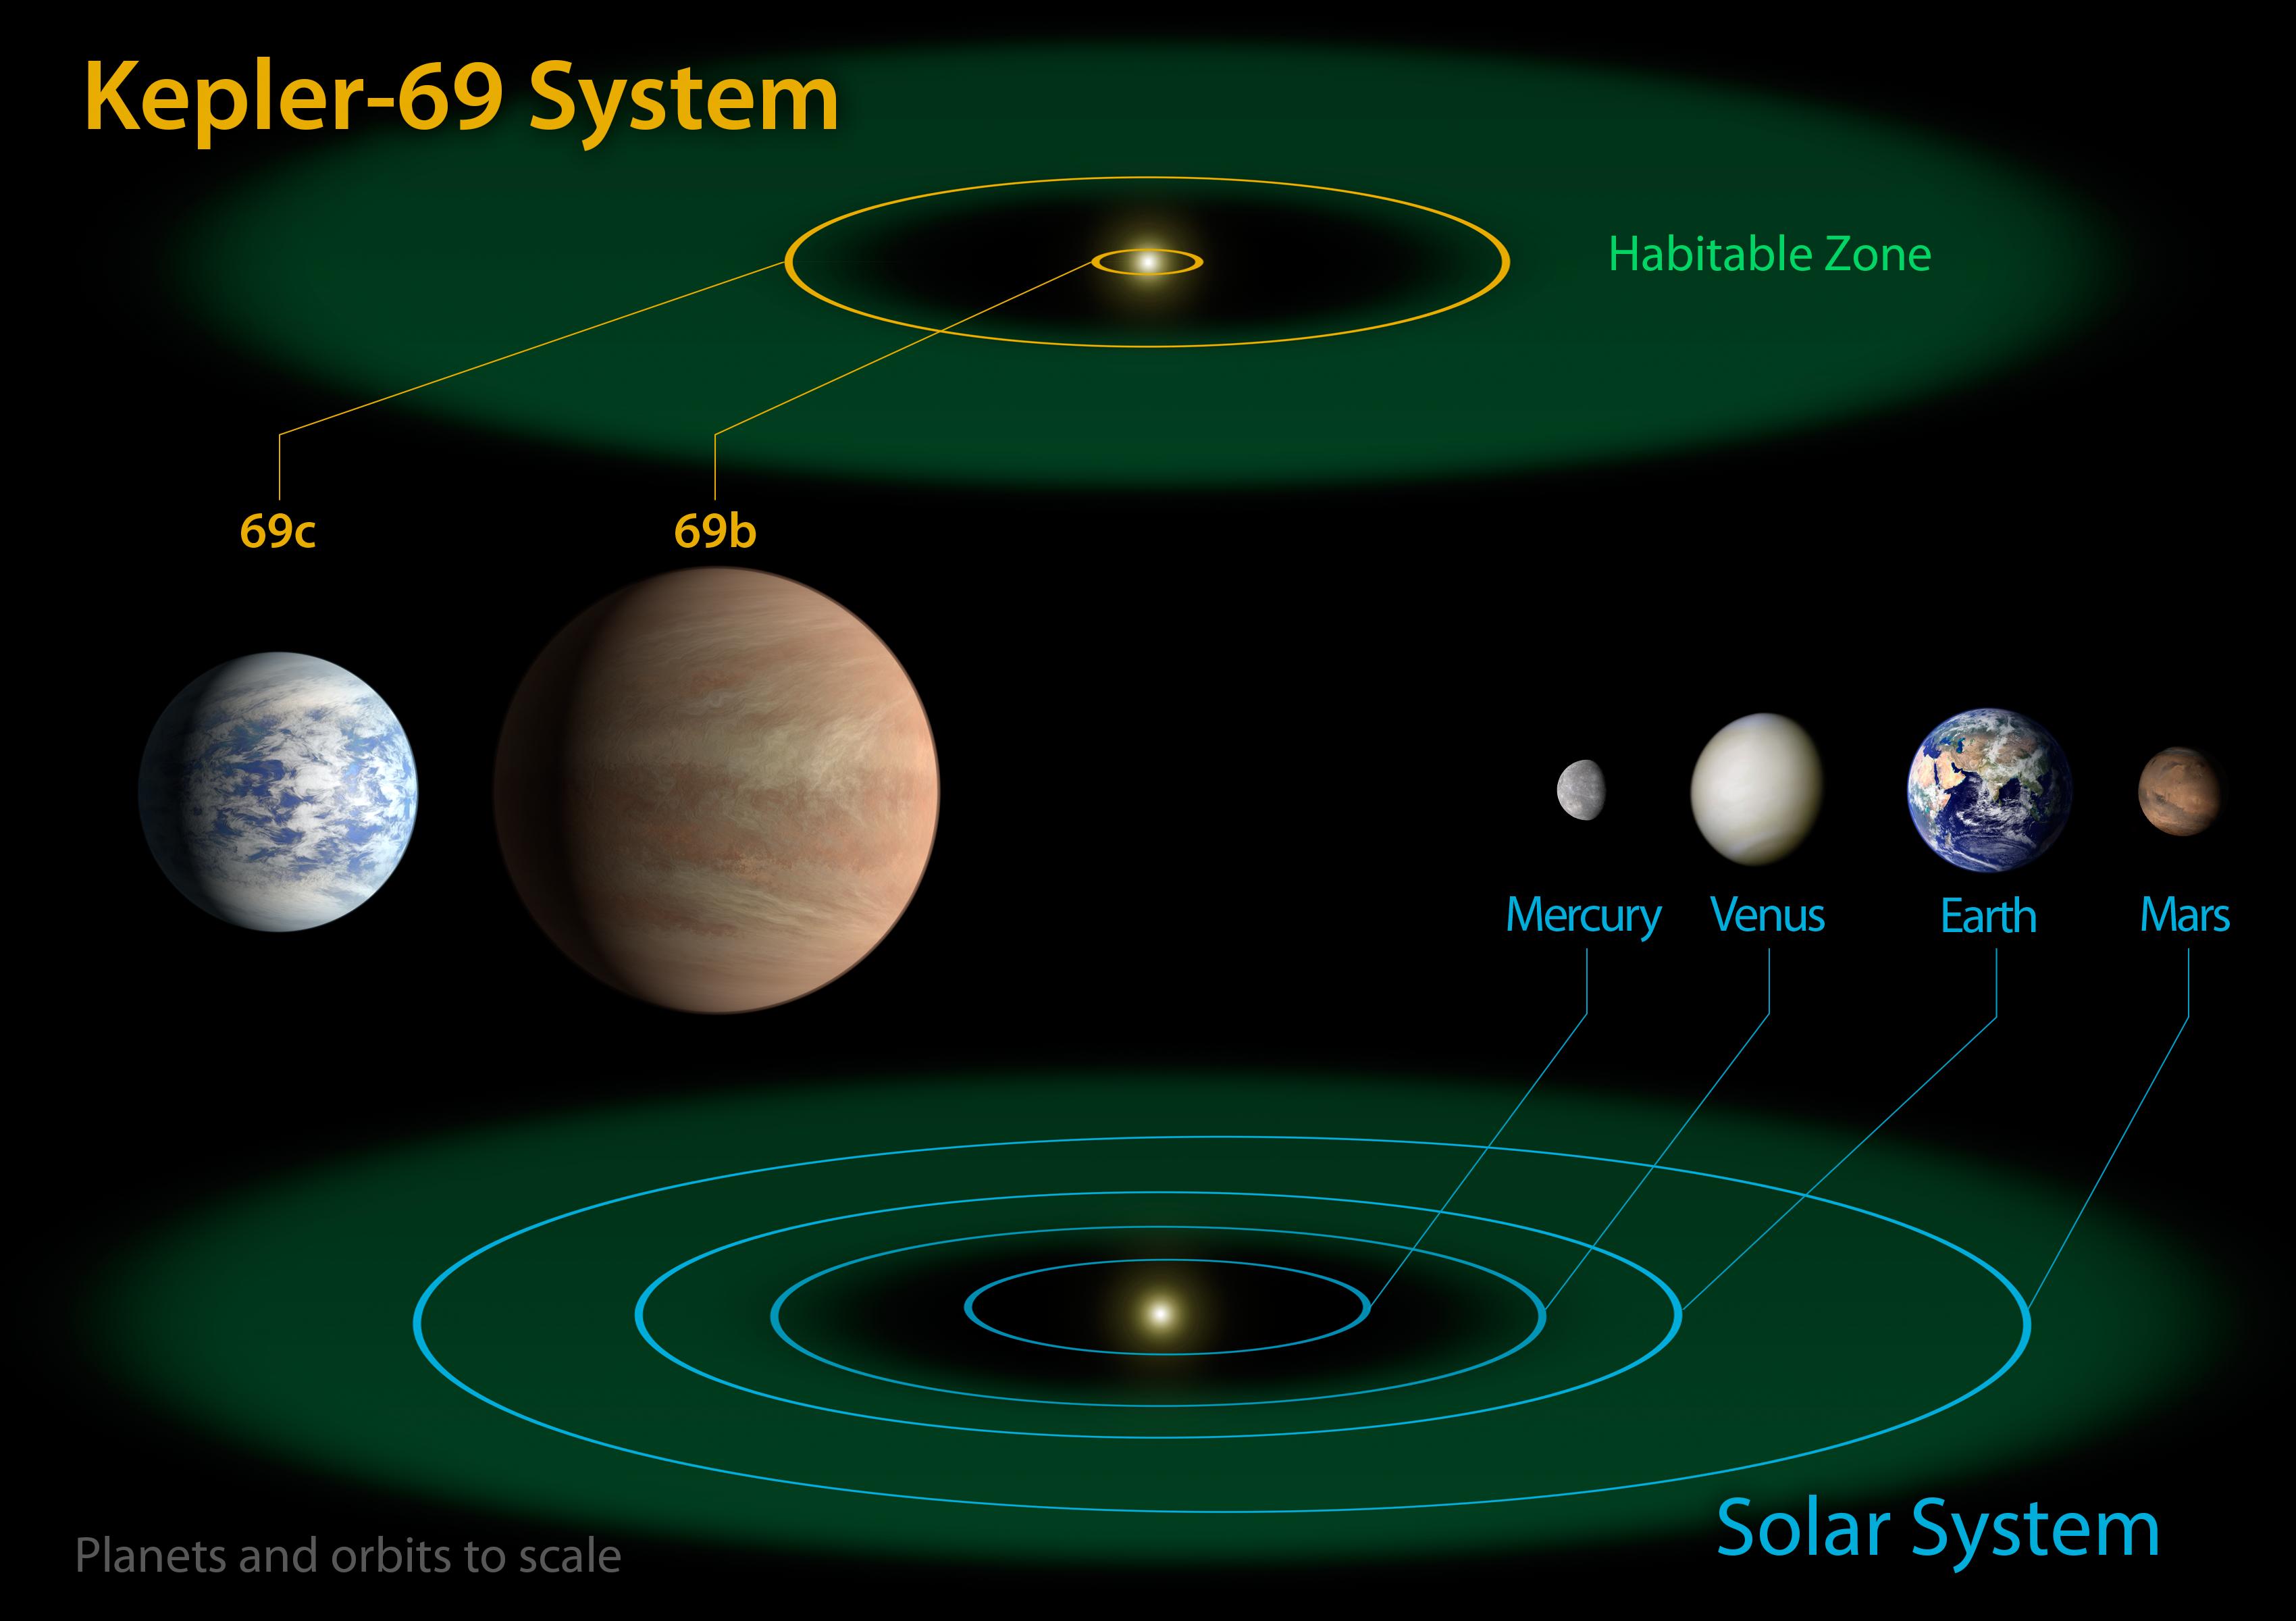 Kepler-69 and the Solar System